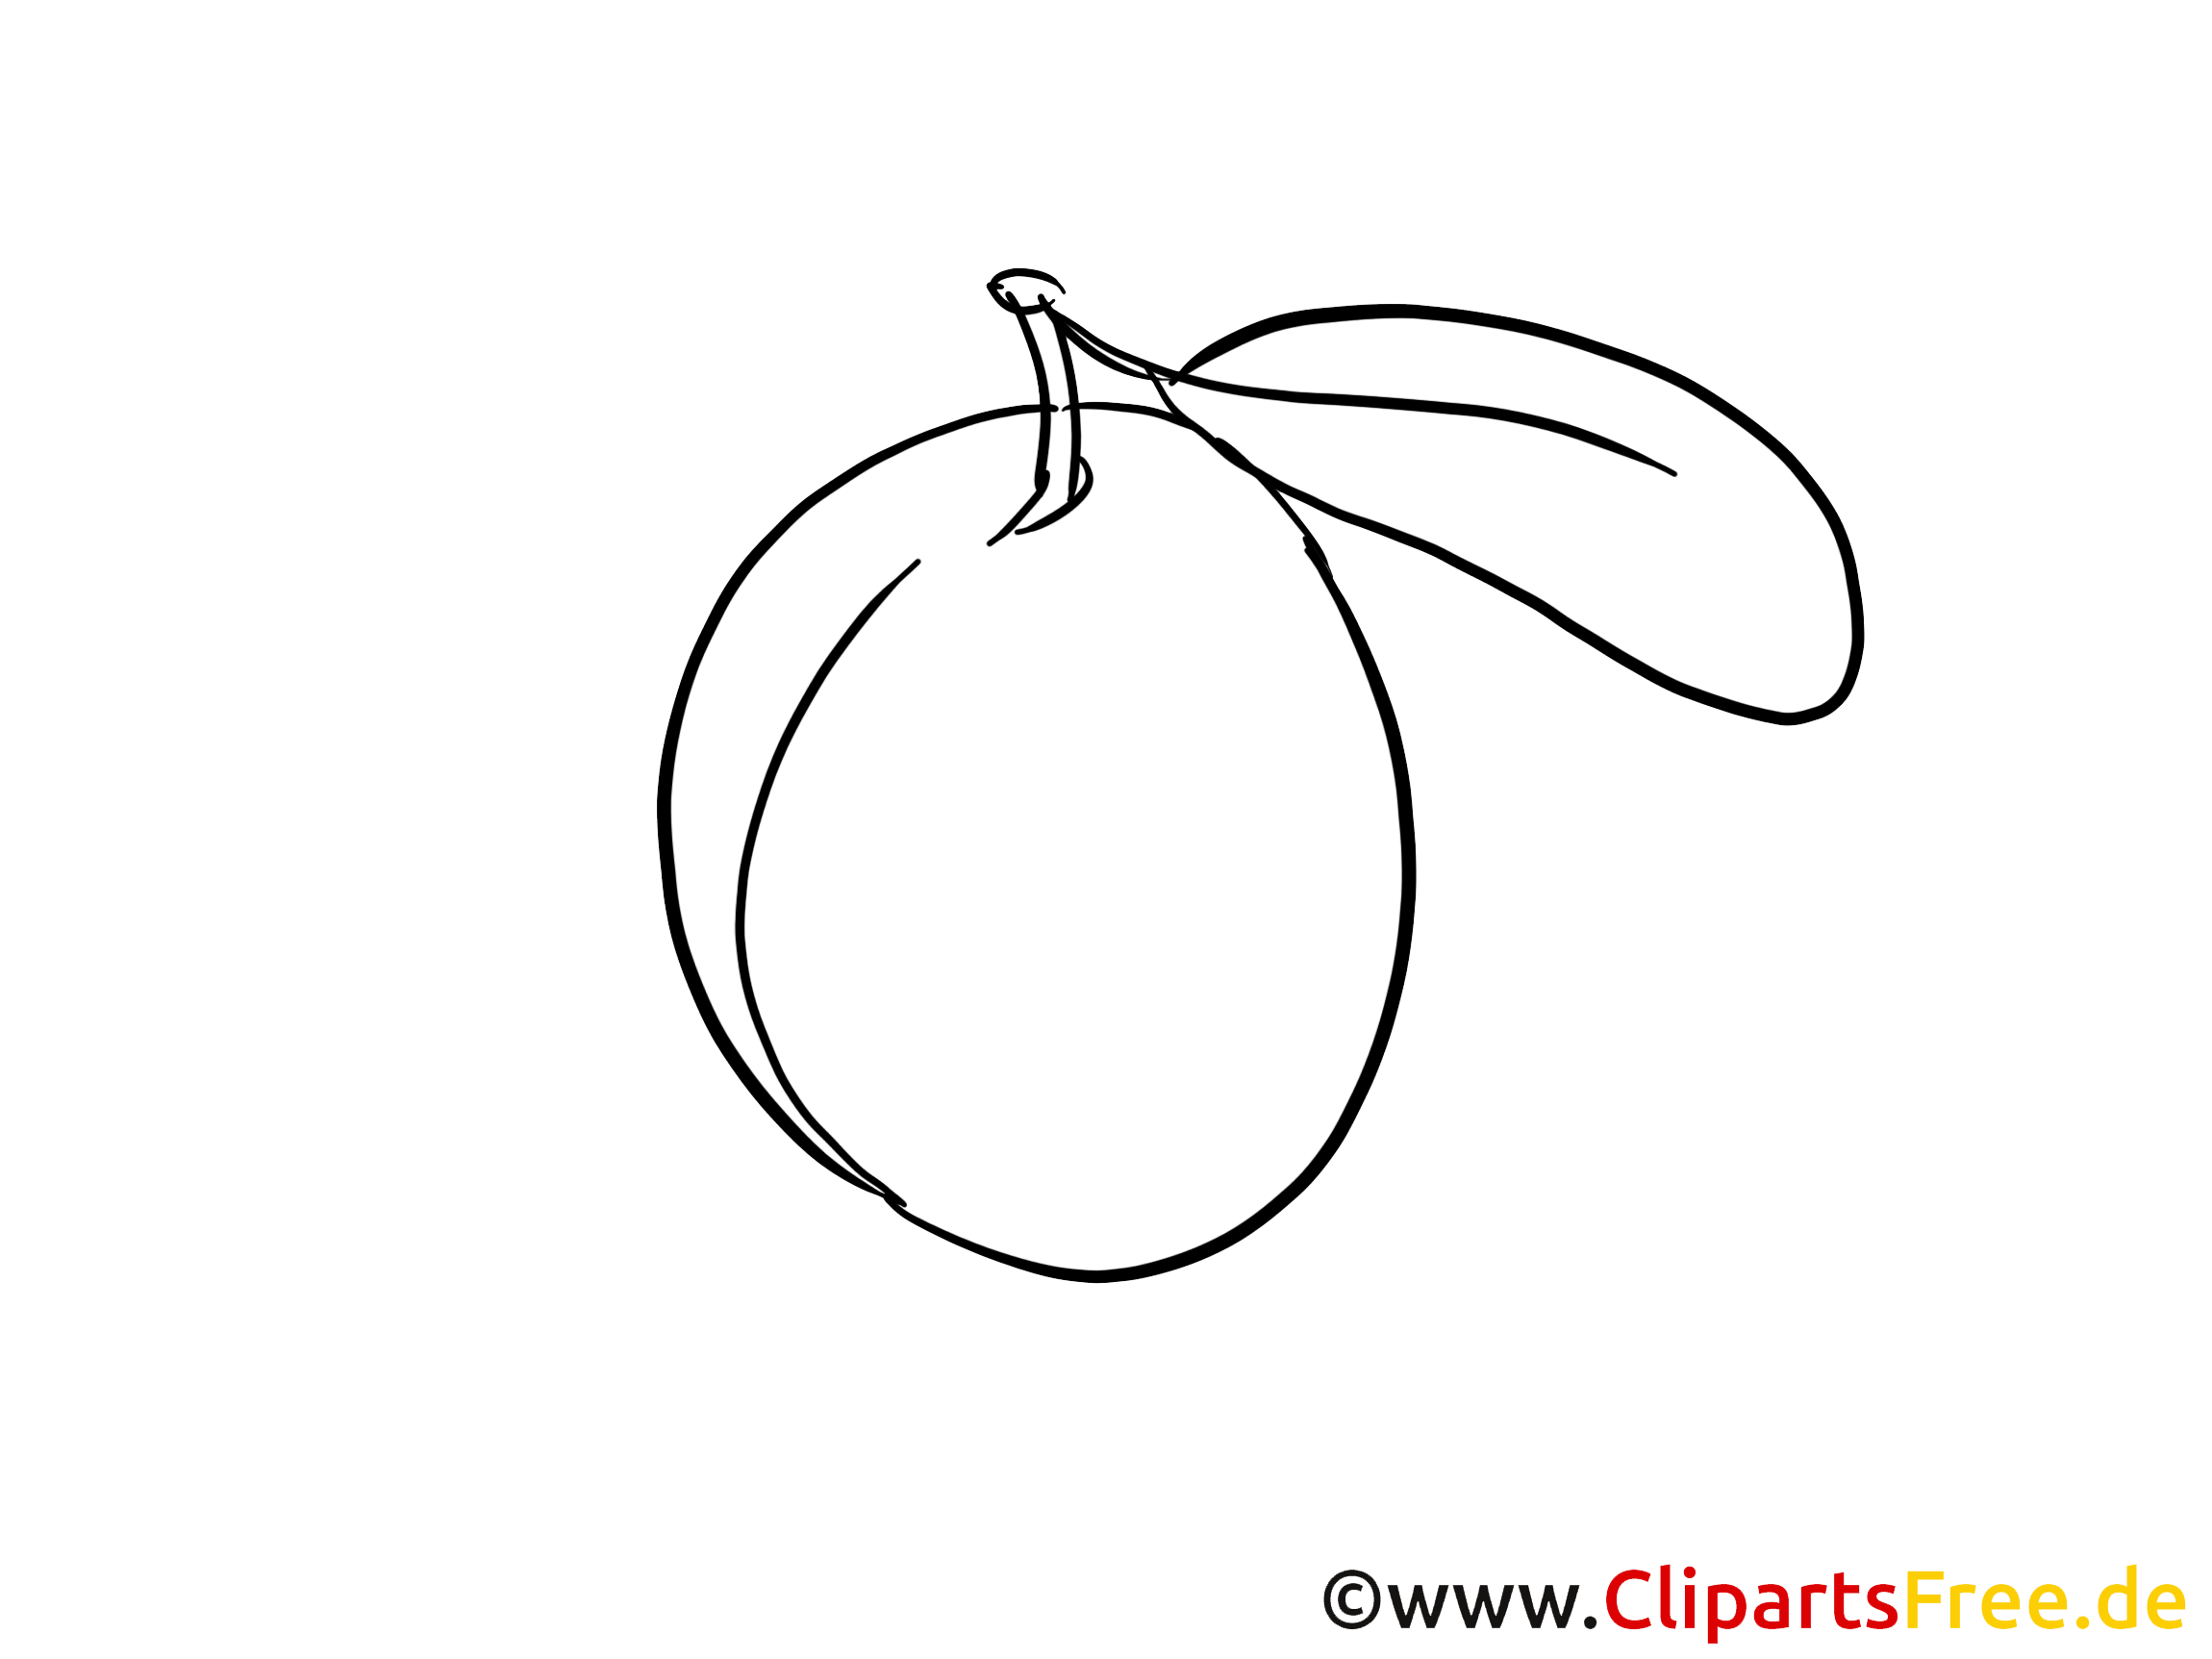 pflaume cliparts obst